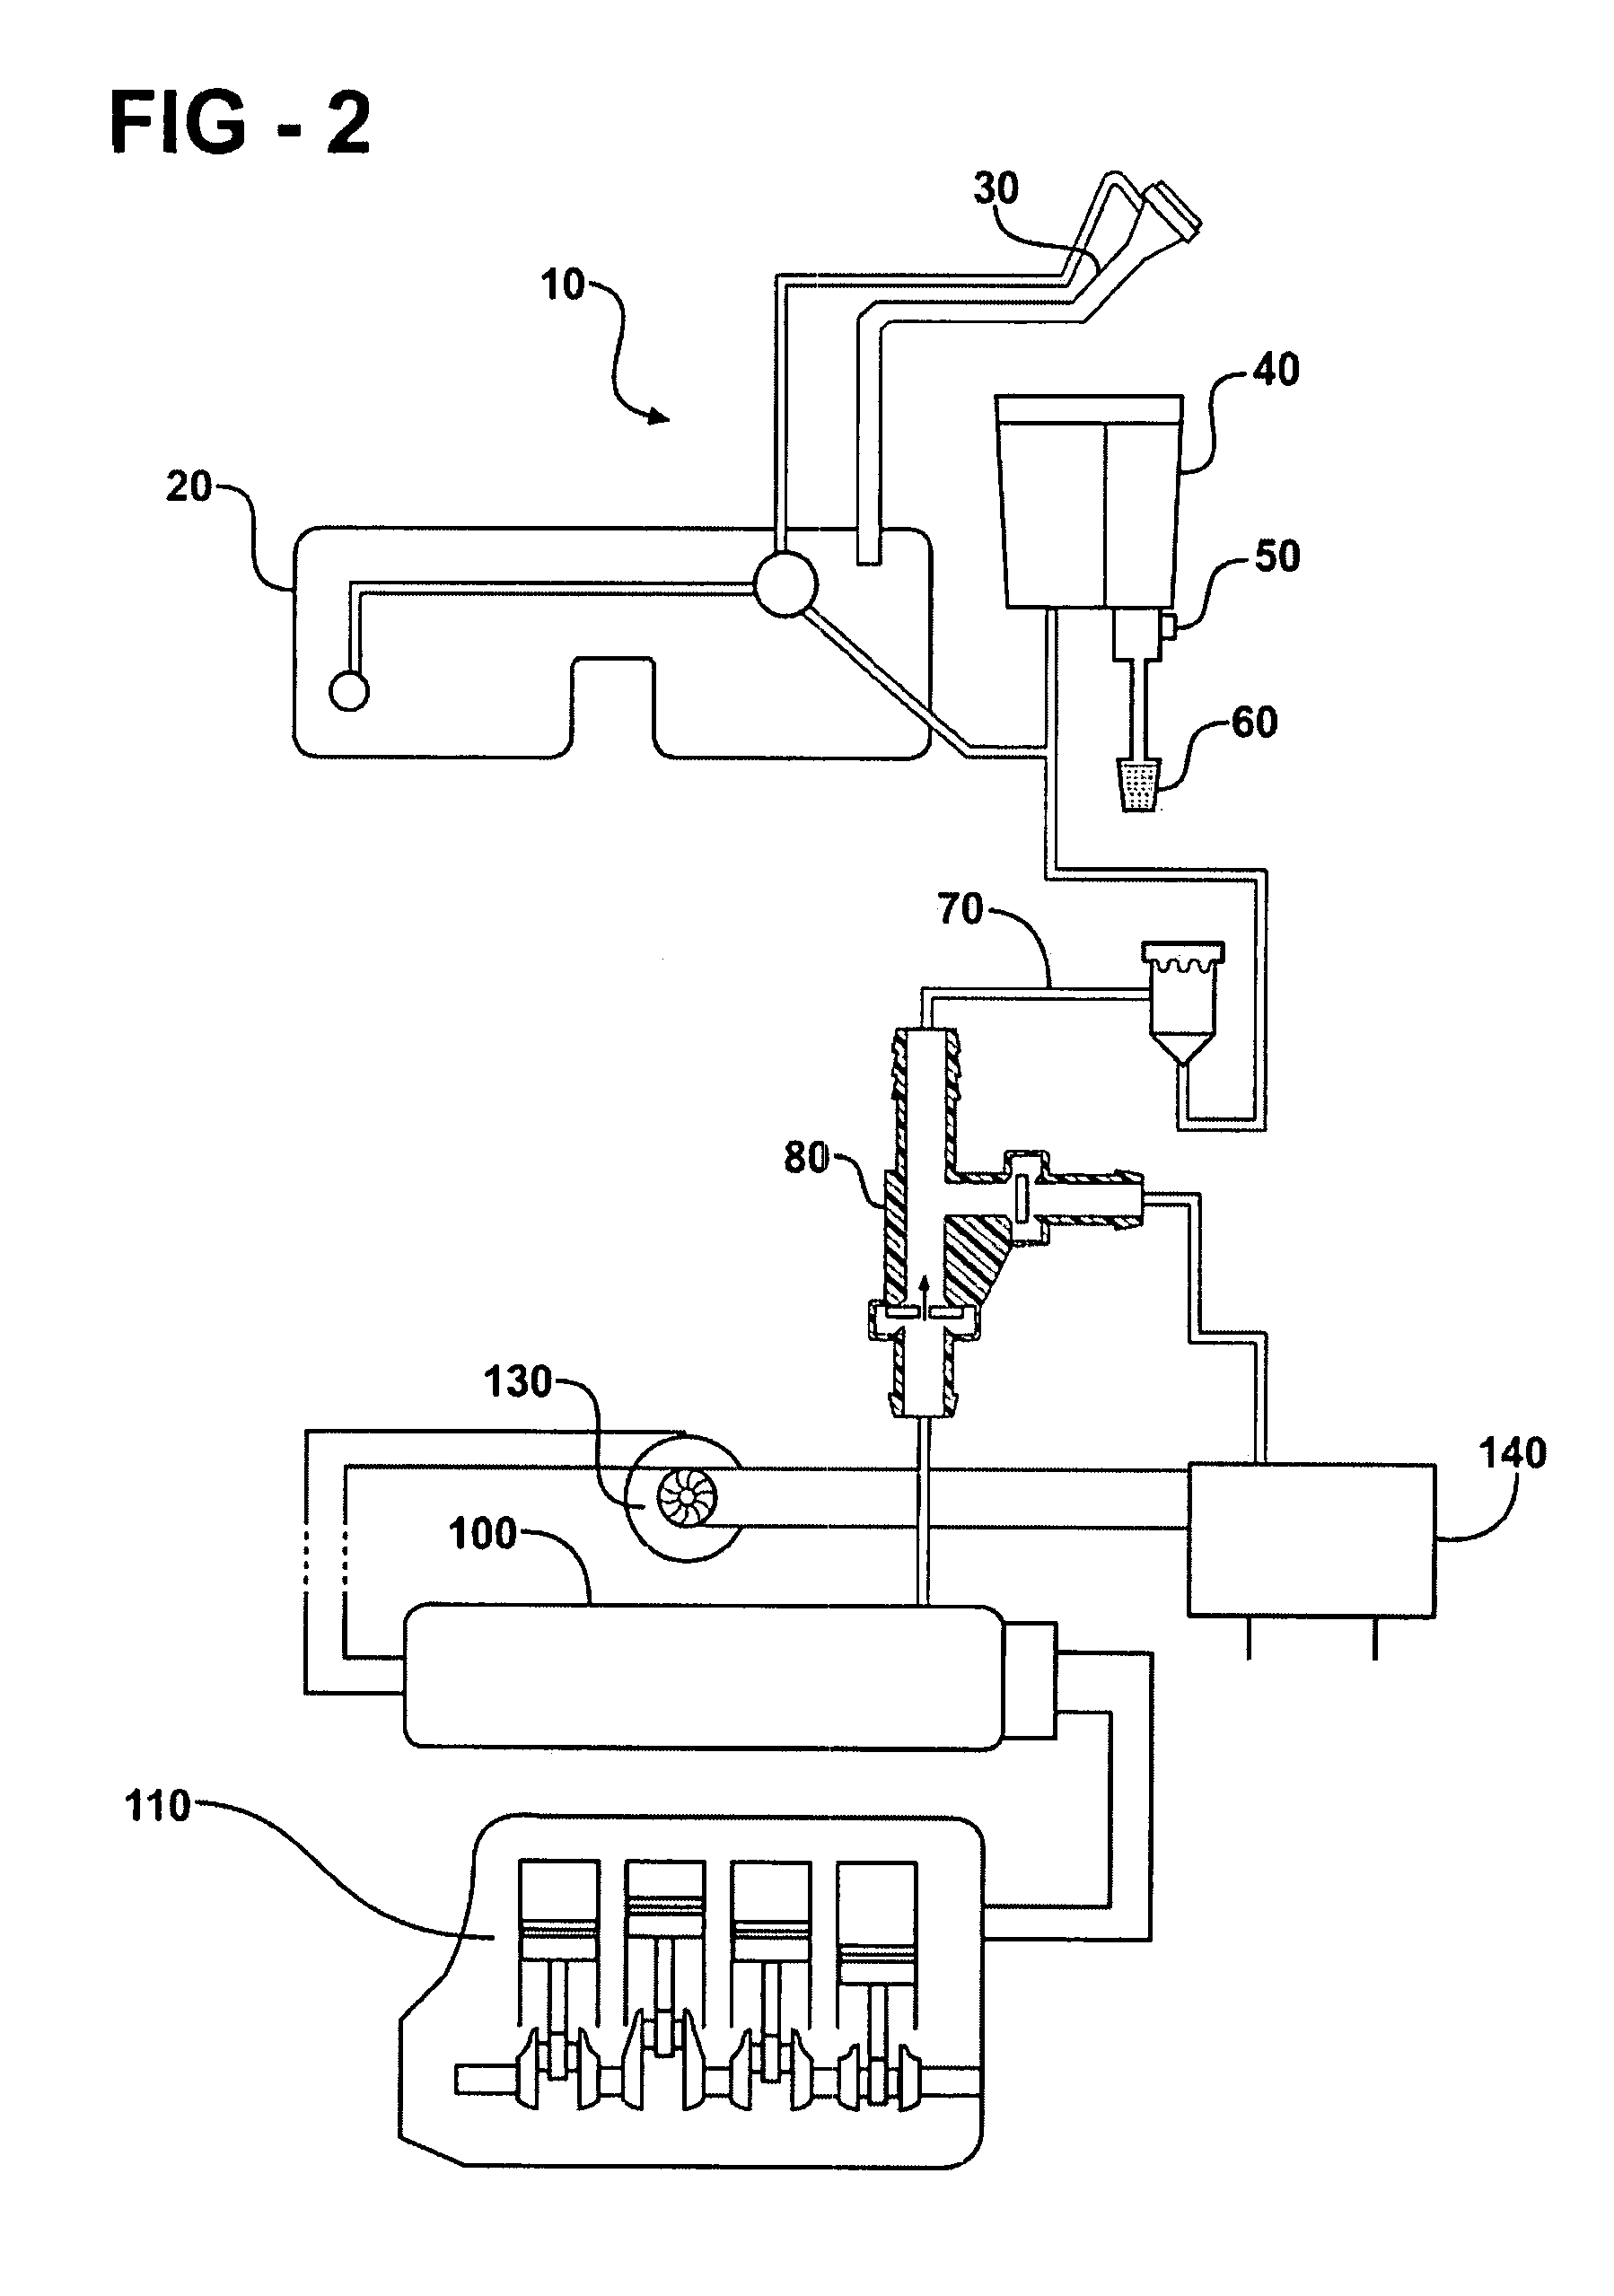 Multi-port check-valve for an evaporative fuel emissions system in a turbocharged vehicle